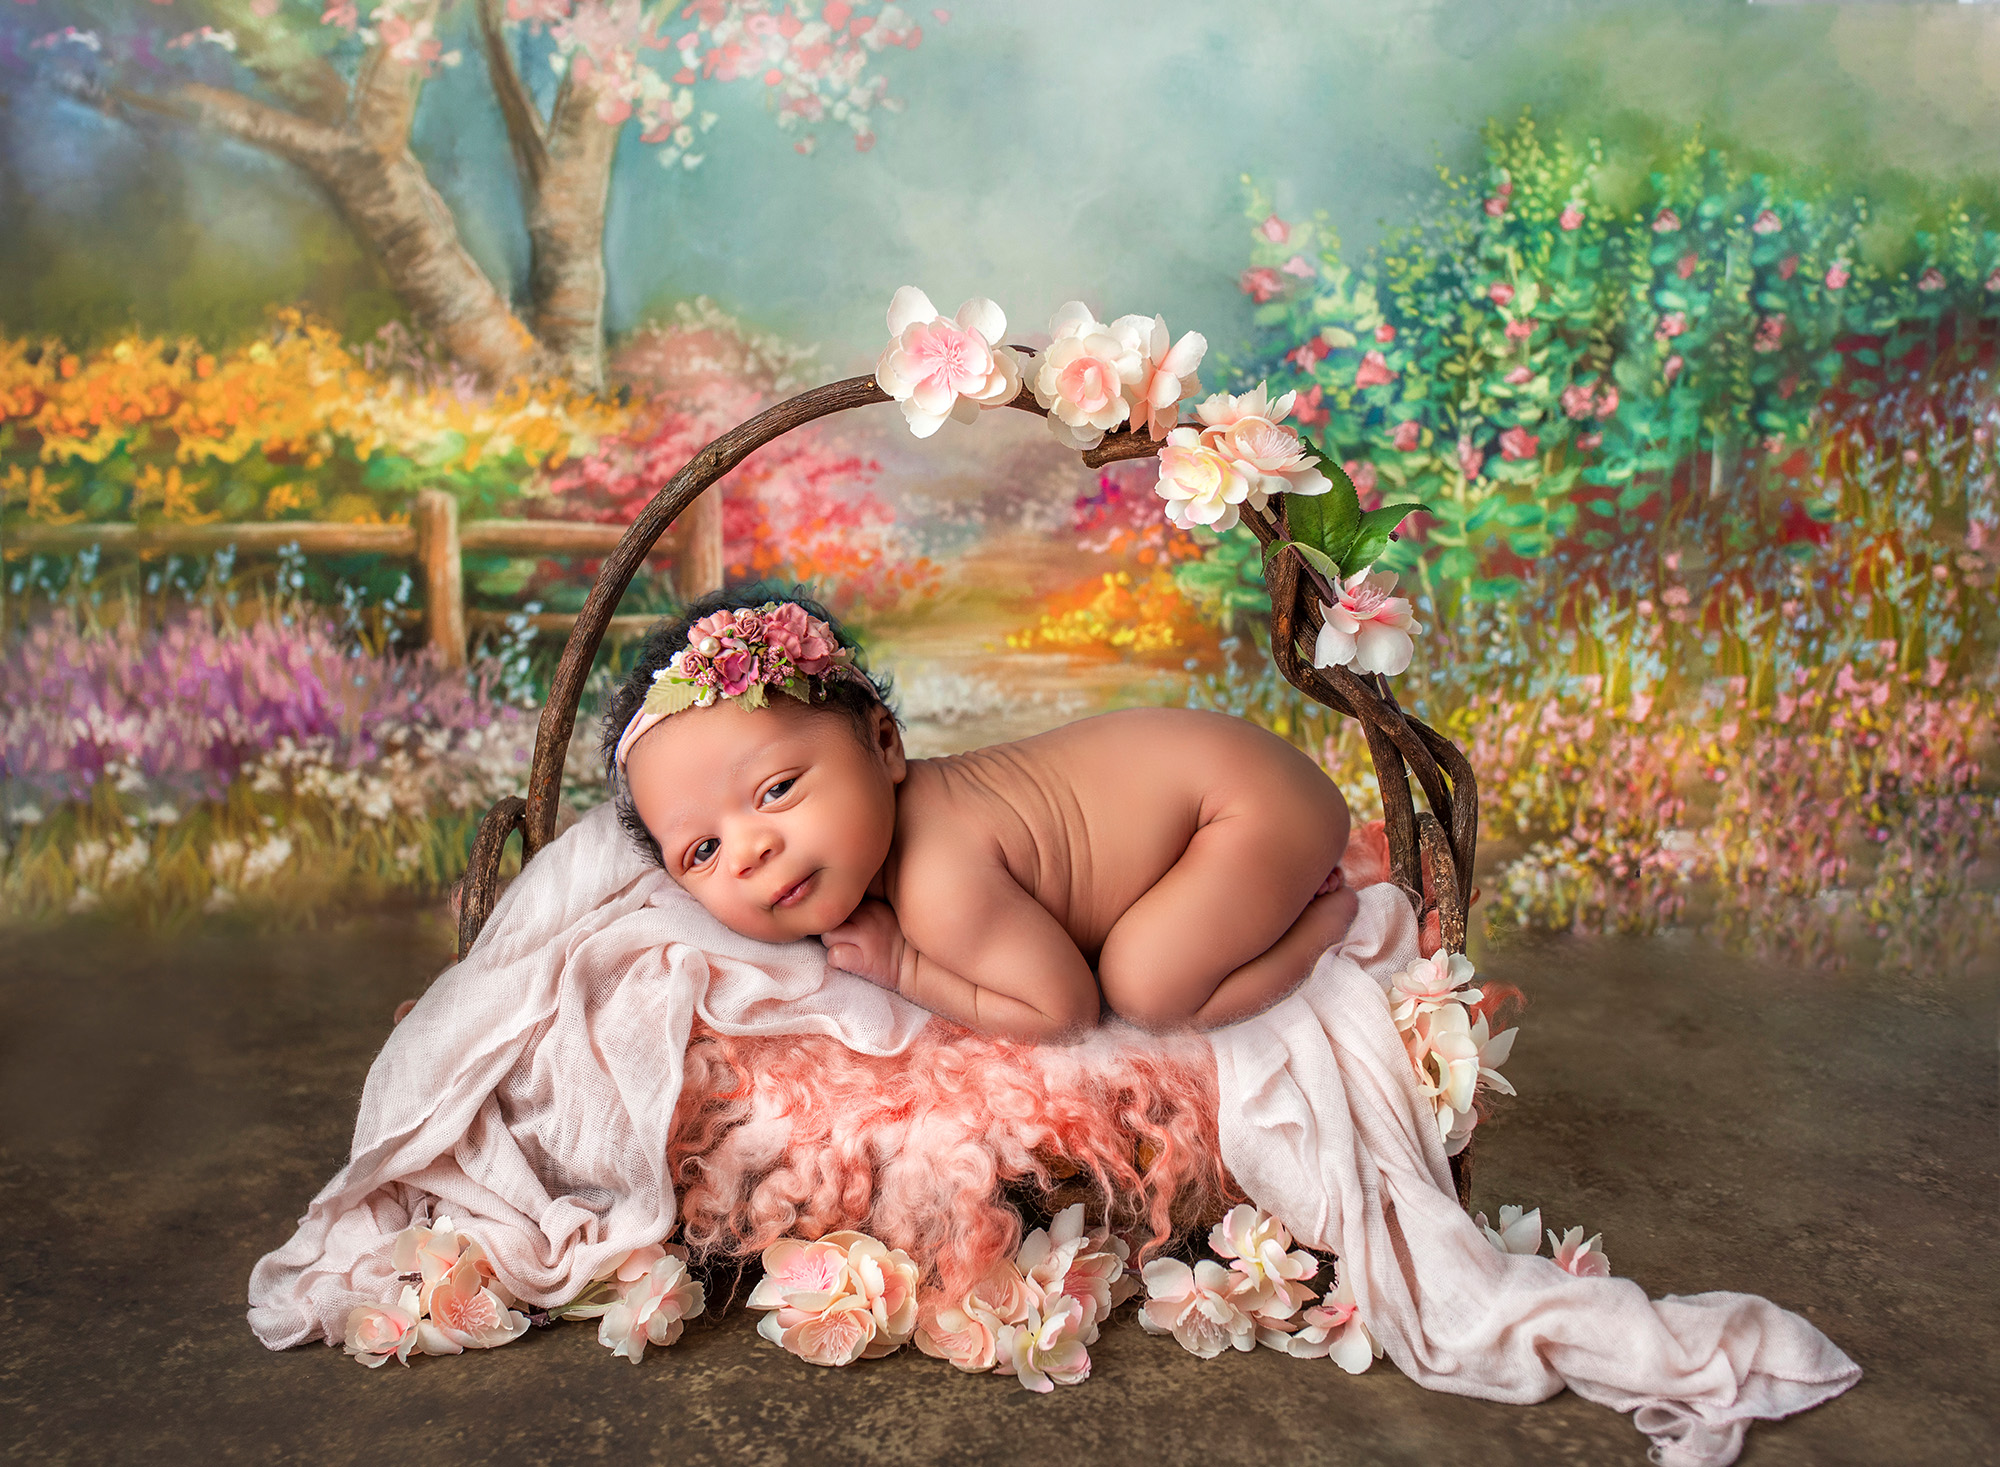 when to do newborn photos baby girl resting on floral bed